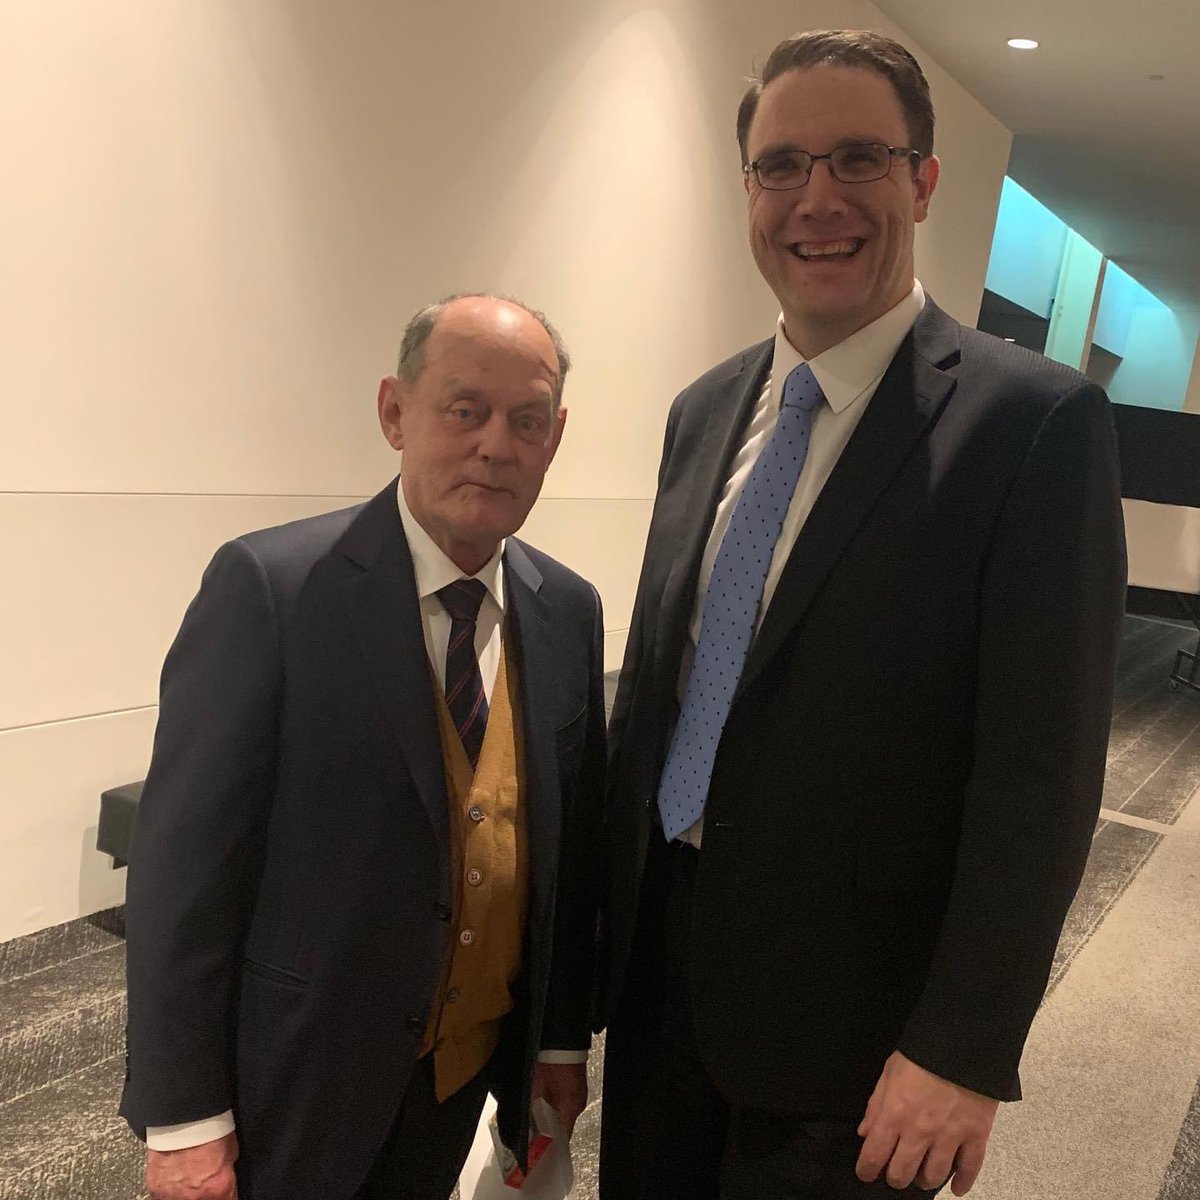 We lost a great Canadian today. Rex Murphy was a proud Canadian and a good friend to the West. In his final columns, he used his voice to highlight the moral imperative for Canadians to fight rising antisemitism, one of the greatest issues facing our country today. He leaves a